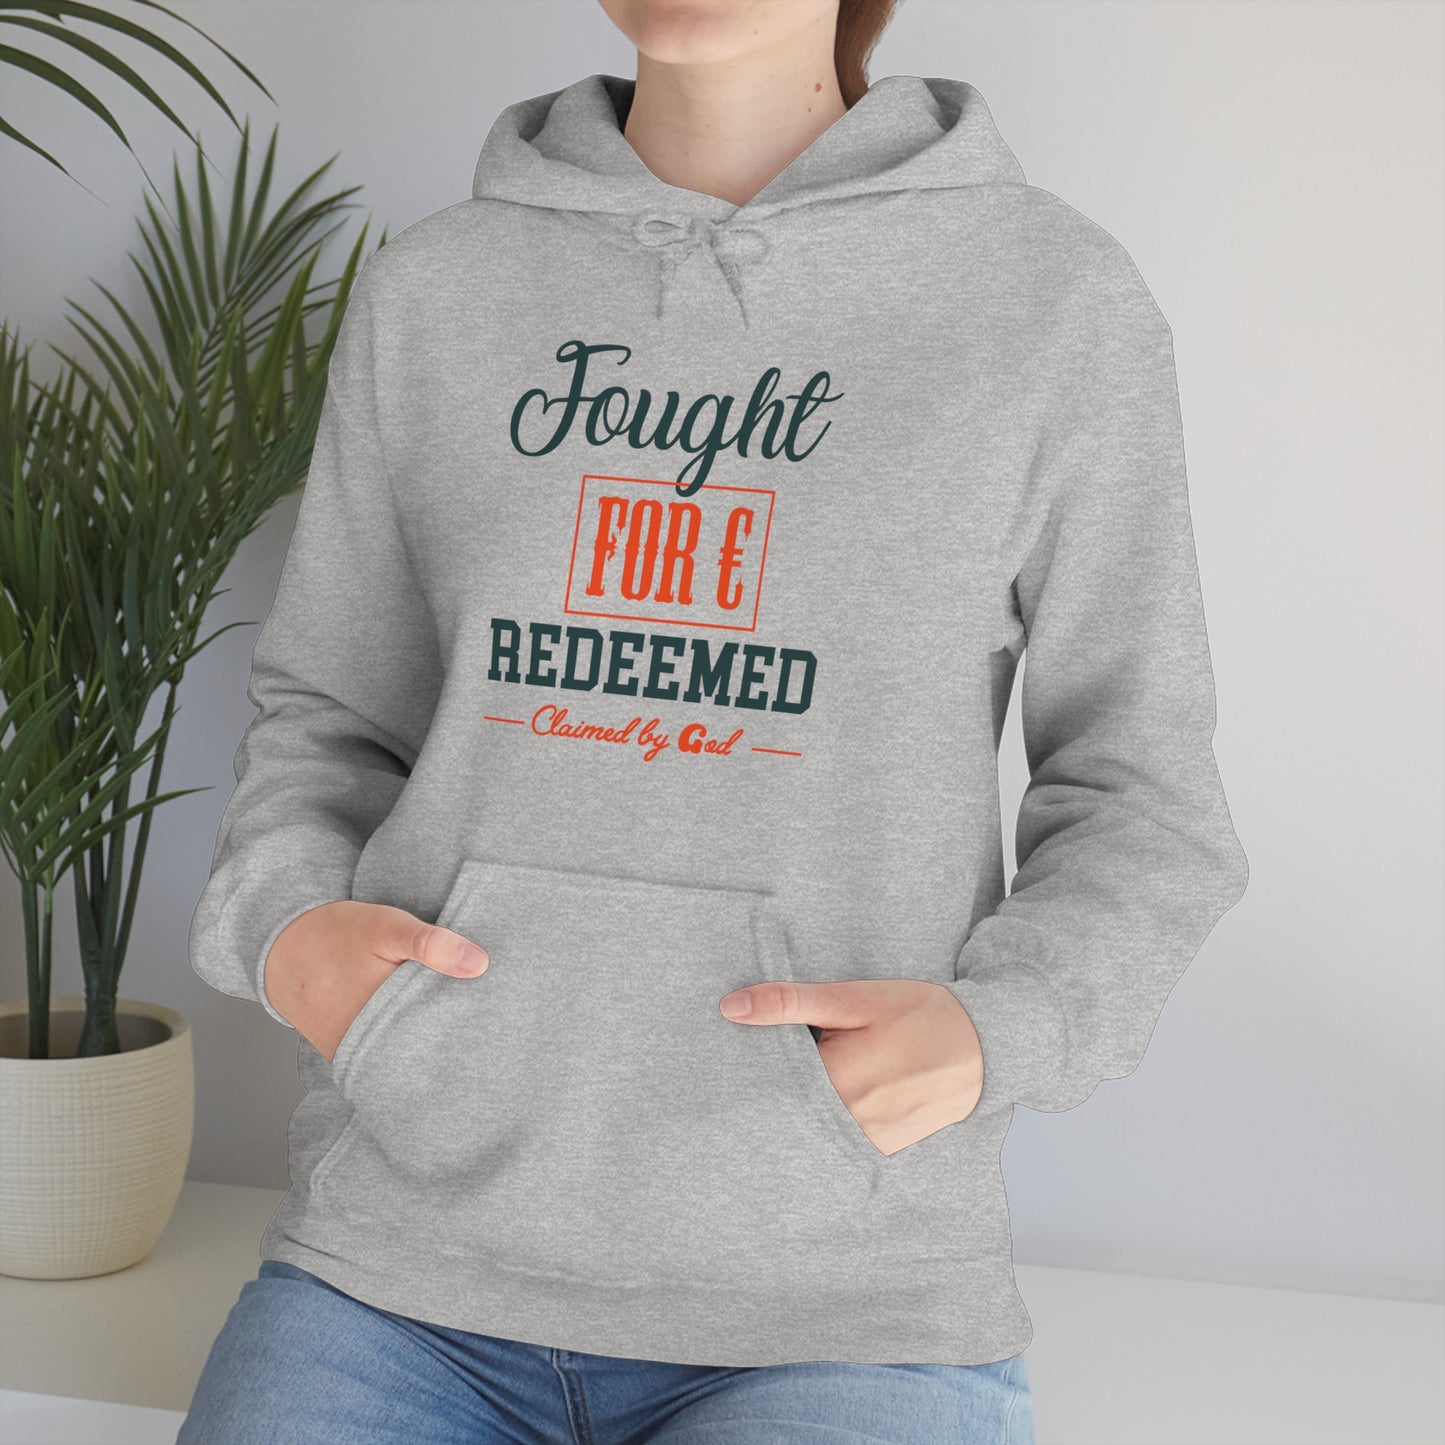 Fought For and Redeemed Unisex Hooded Sweatshirt